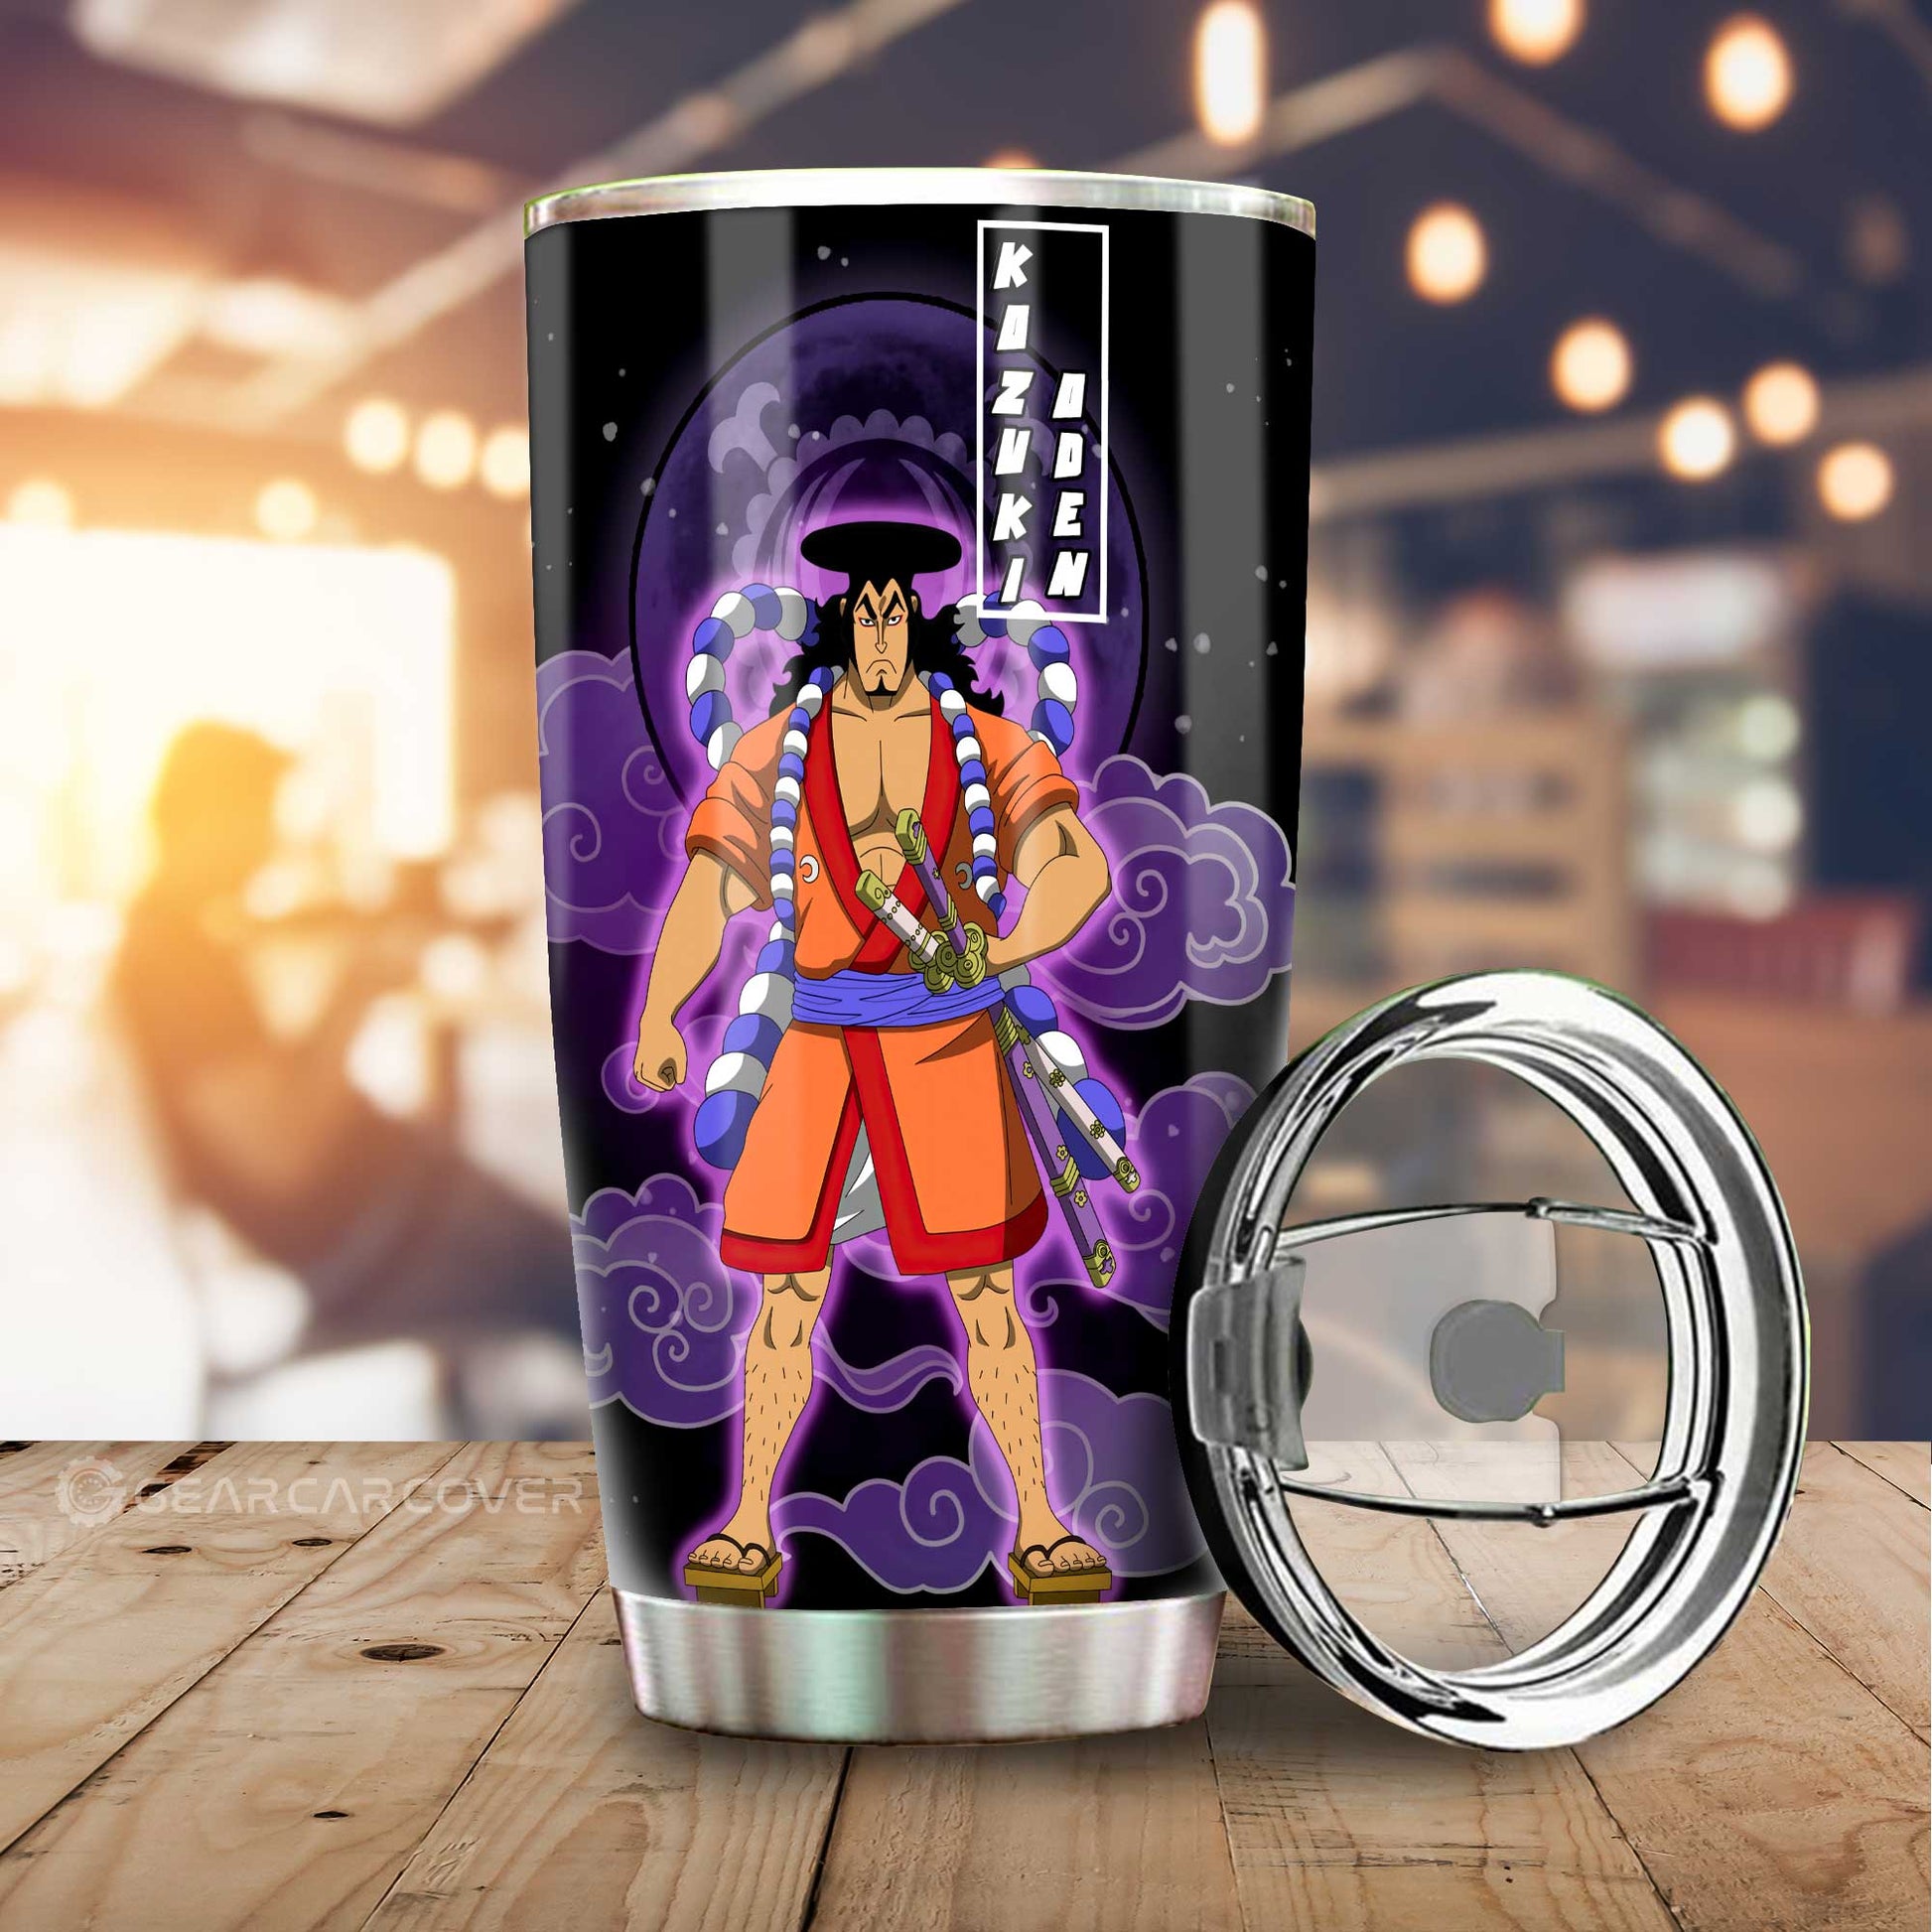 Kozuki Oden Tumbler Cup Custom For One Piece Anime Fans - Gearcarcover - 1